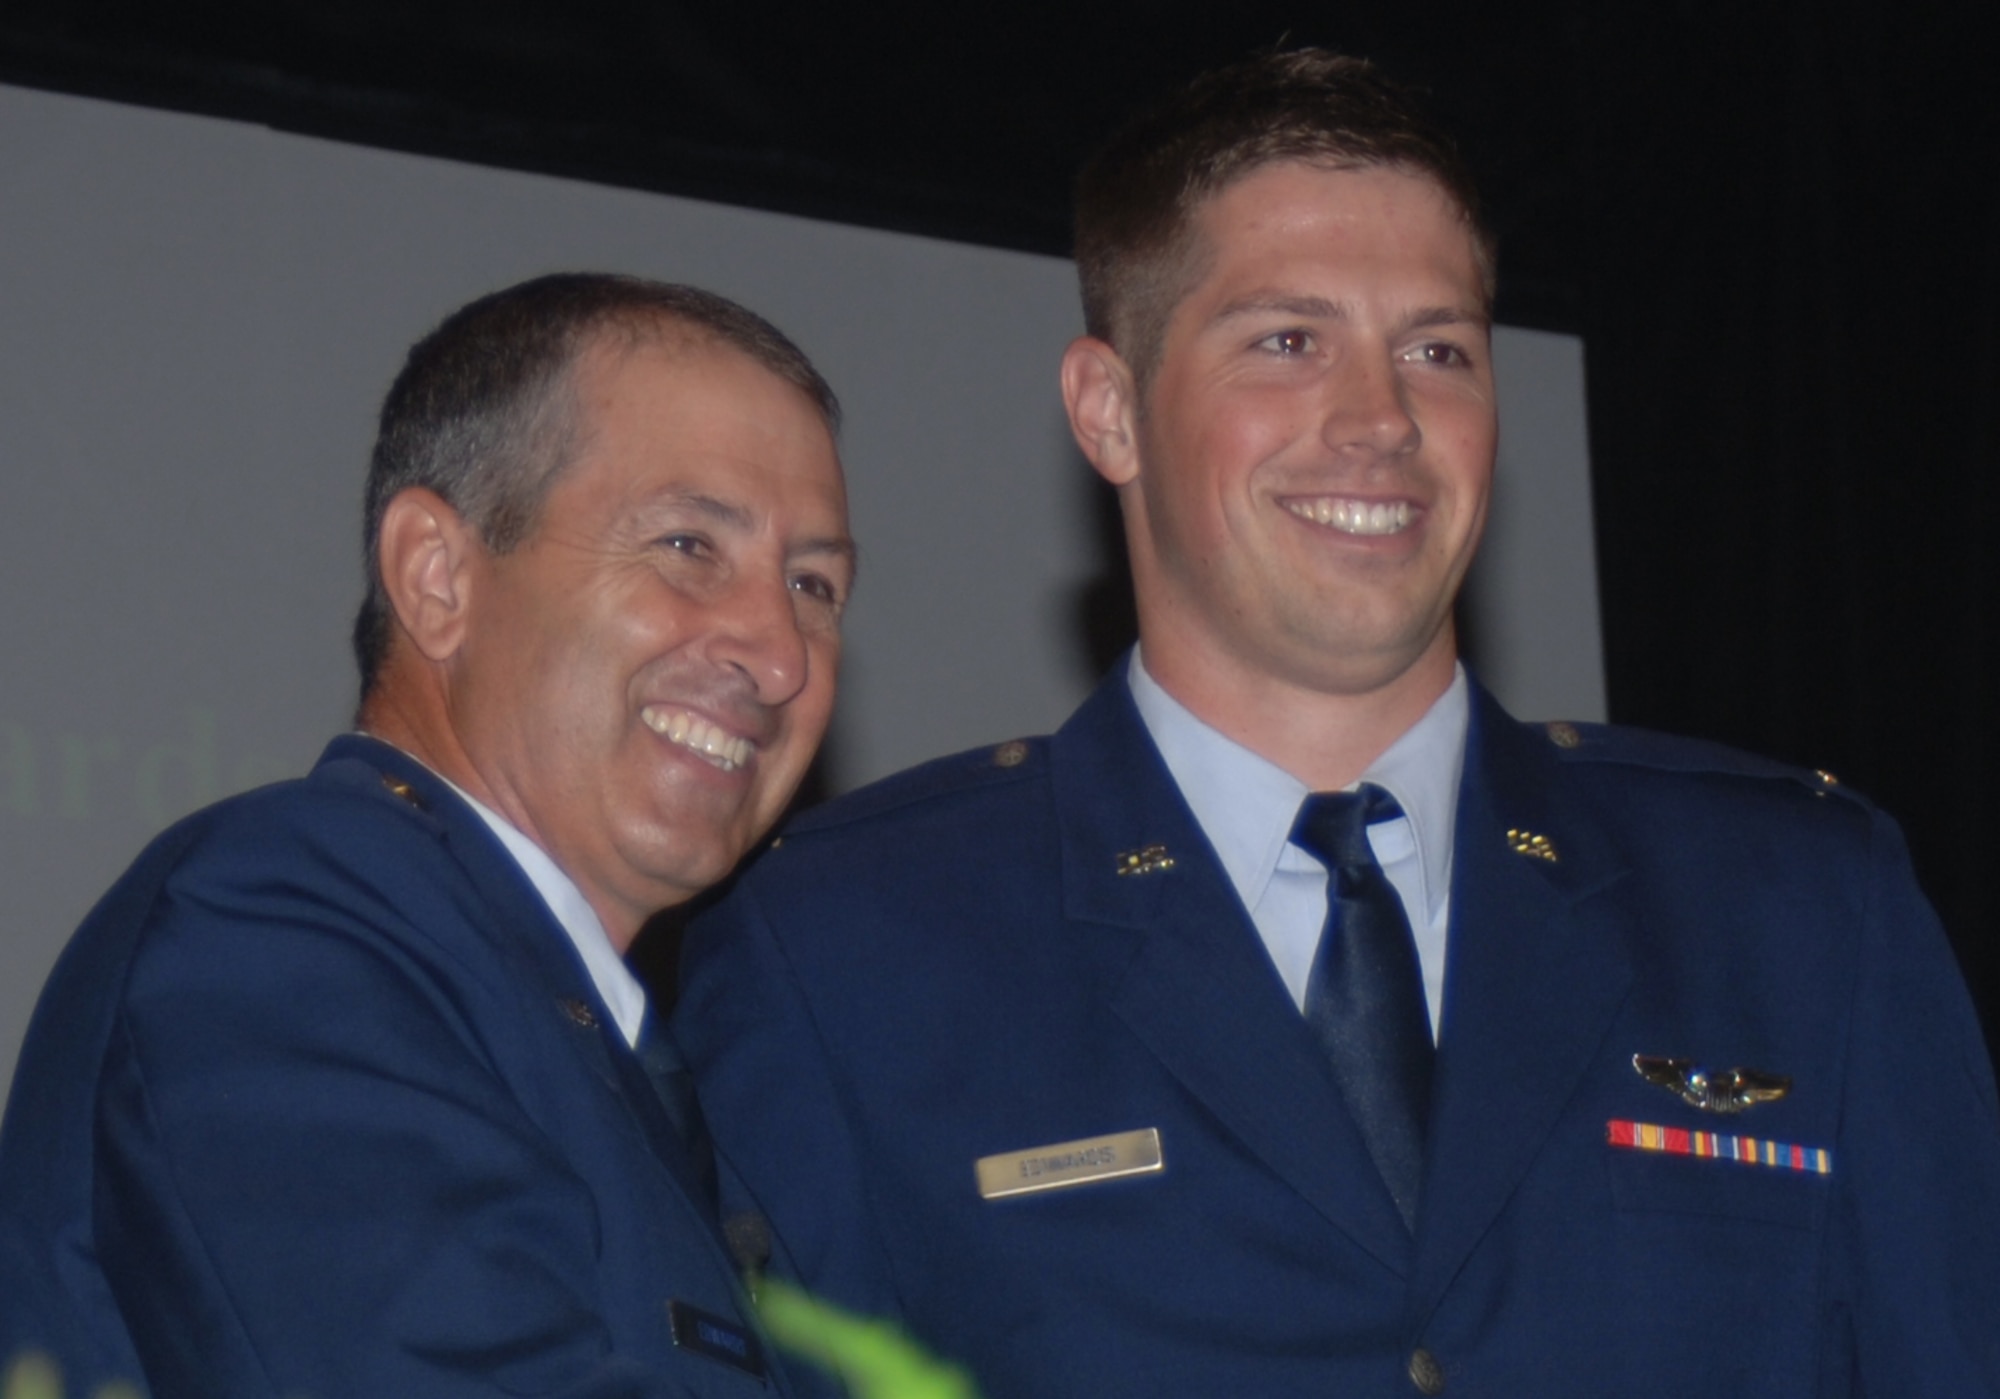 Major Gen. Mike Edwards, Adjutant General for Colorado National Guard, smiles with his son, 2nd Lt. James Edwards, after pinning his son's pilots wings on him at the graduation of Specialized Undergraduate Pilot Training class 07-13 Aug. 17. General Edwards played a dual role in the graduation, he was the keynote speaker as well as the proud parent of one of the Air Force's newest pilots. (U.S. Air Force photo by Airman 1st Class Danielle Powell)